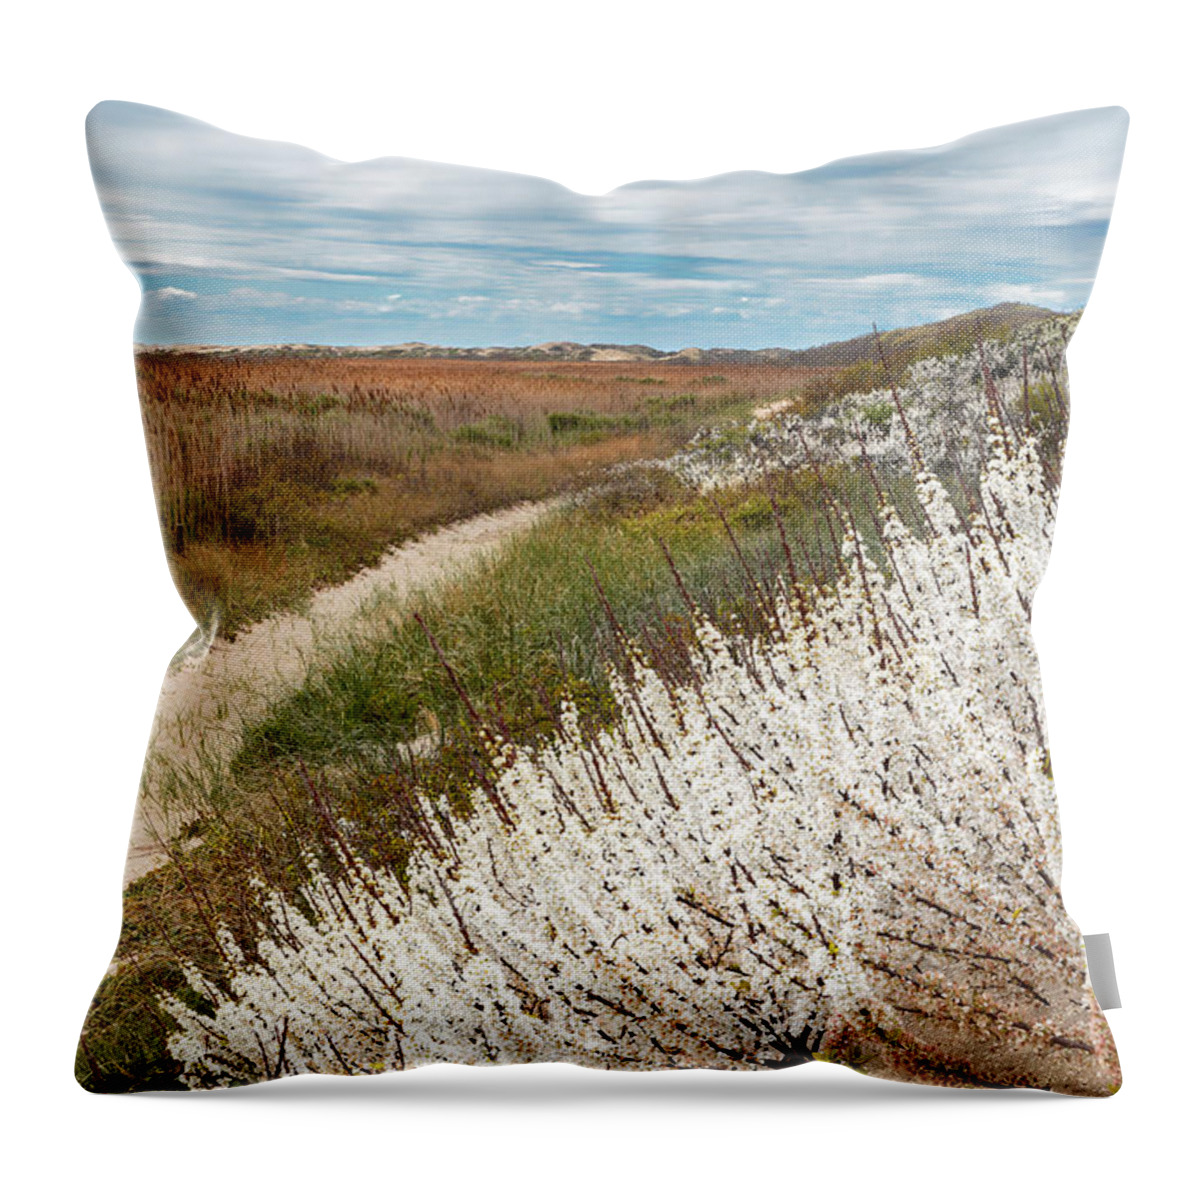 Cape Cod Throw Pillow featuring the photograph Beach Plums by Bill Wakeley